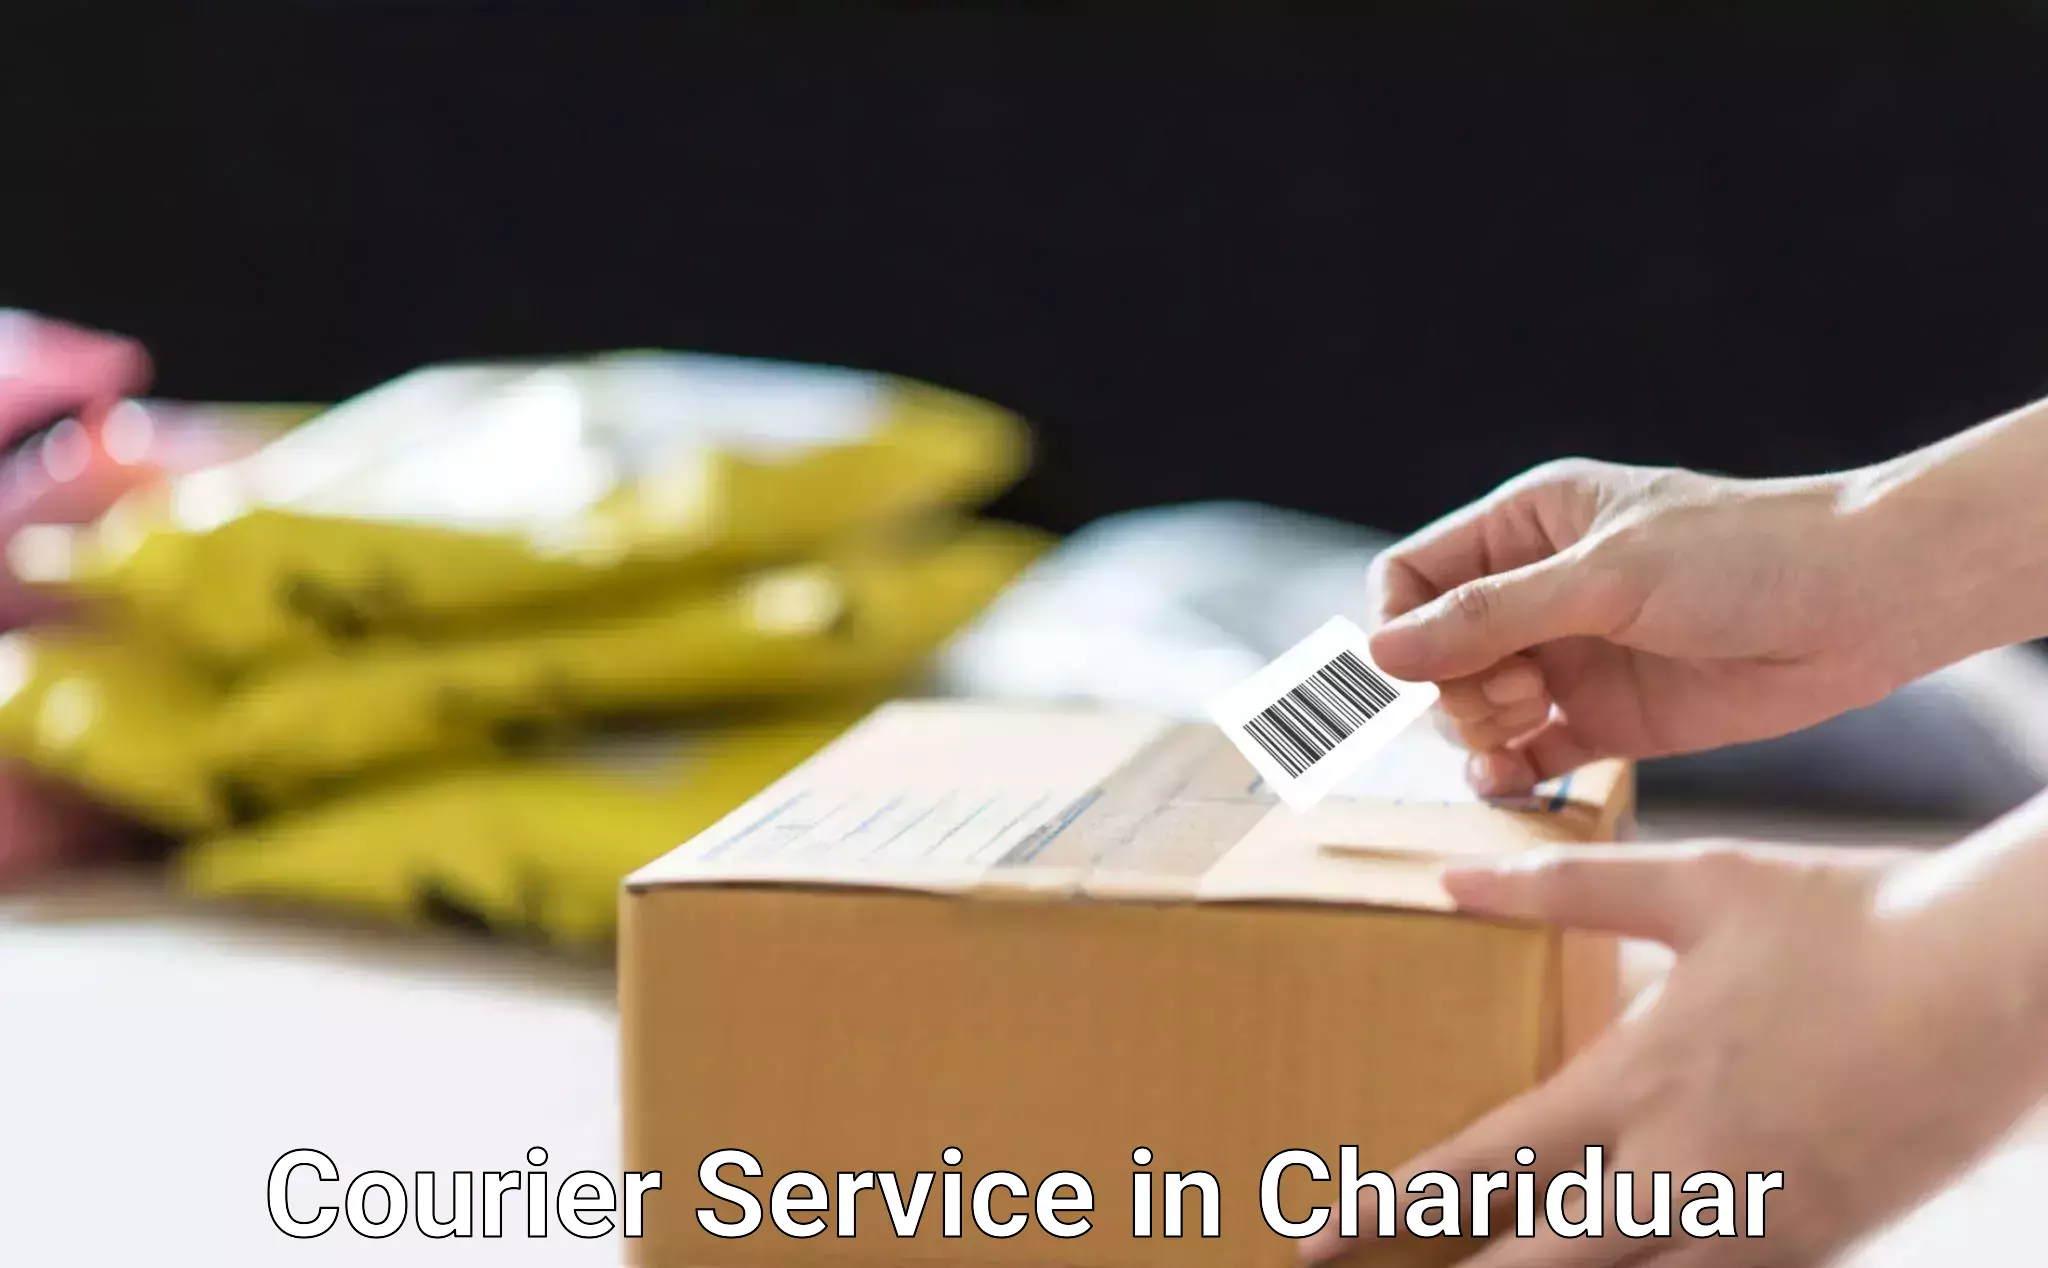 Efficient package consolidation in Chariduar